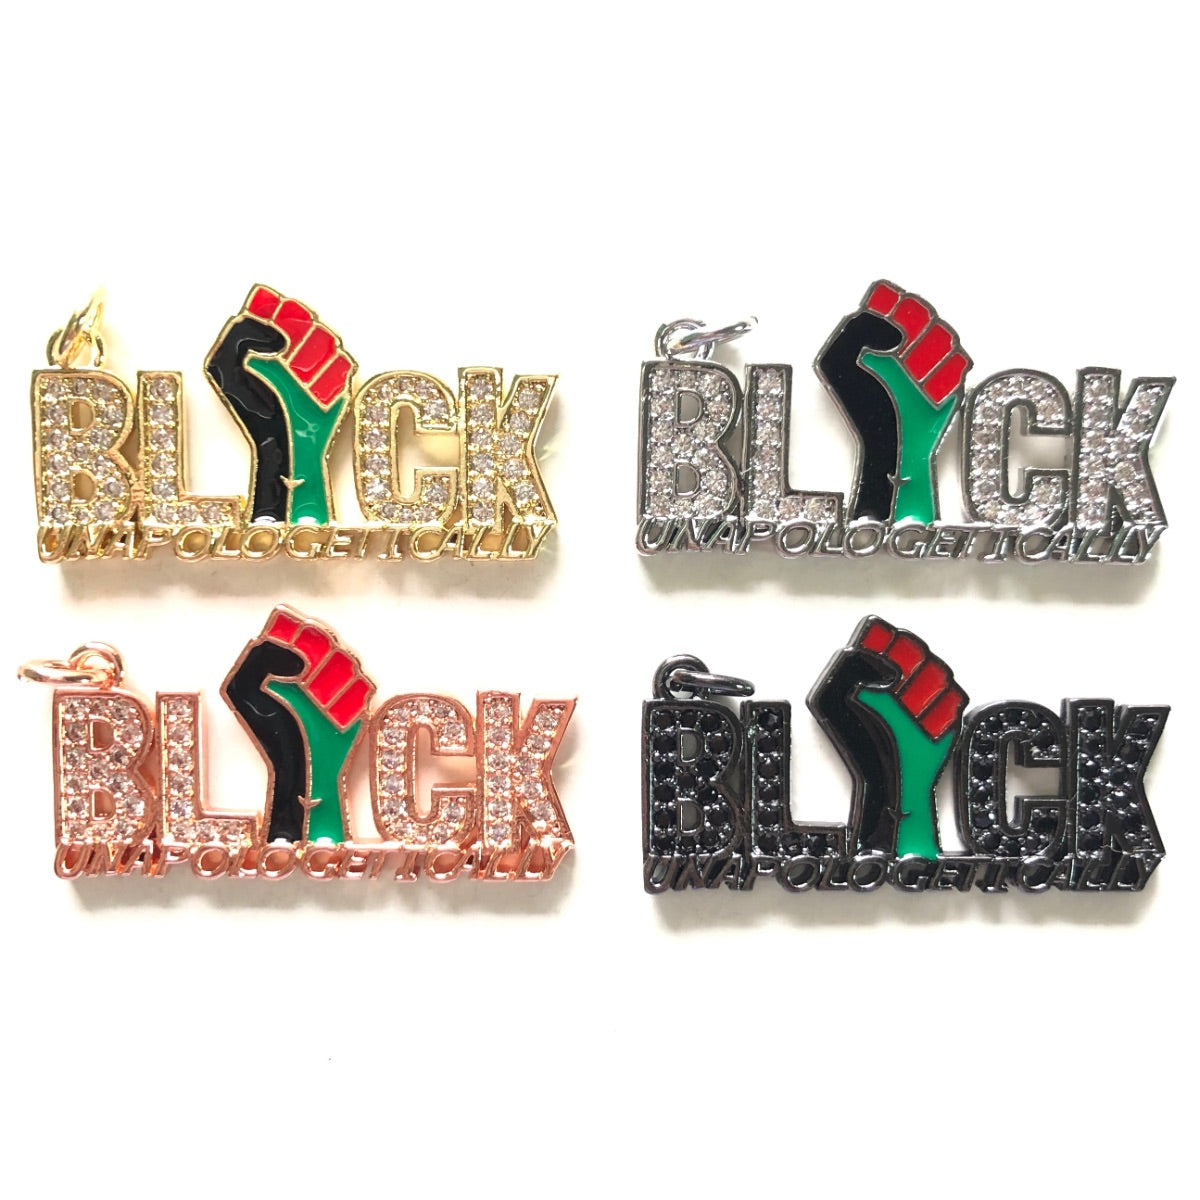 10pcs/lot 36*19mm Enamel Black Lives Matter Fist CZ Pave Black Unapologetically Word Charms for Juneteenth Black Month Awareness CZ Paved Charms Juneteenth & Black History Month Awareness New Charms Arrivals Charms Beads Beyond